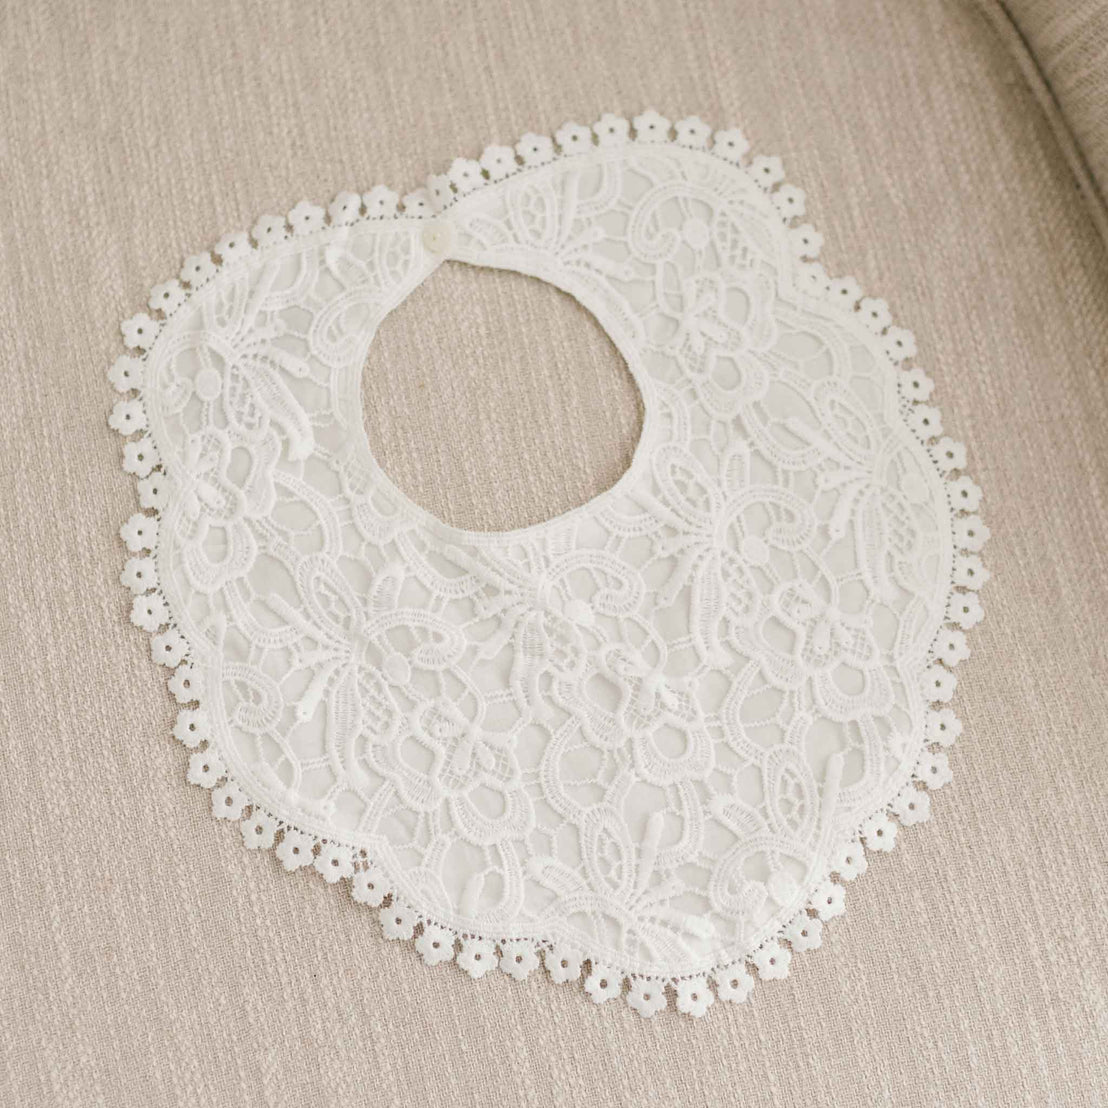 Flat lay of the Lola Lace Bib. The bib is designed with rich rayon blend with lace overlay in light ivory, cotton lace accents the edge and secures with a button.